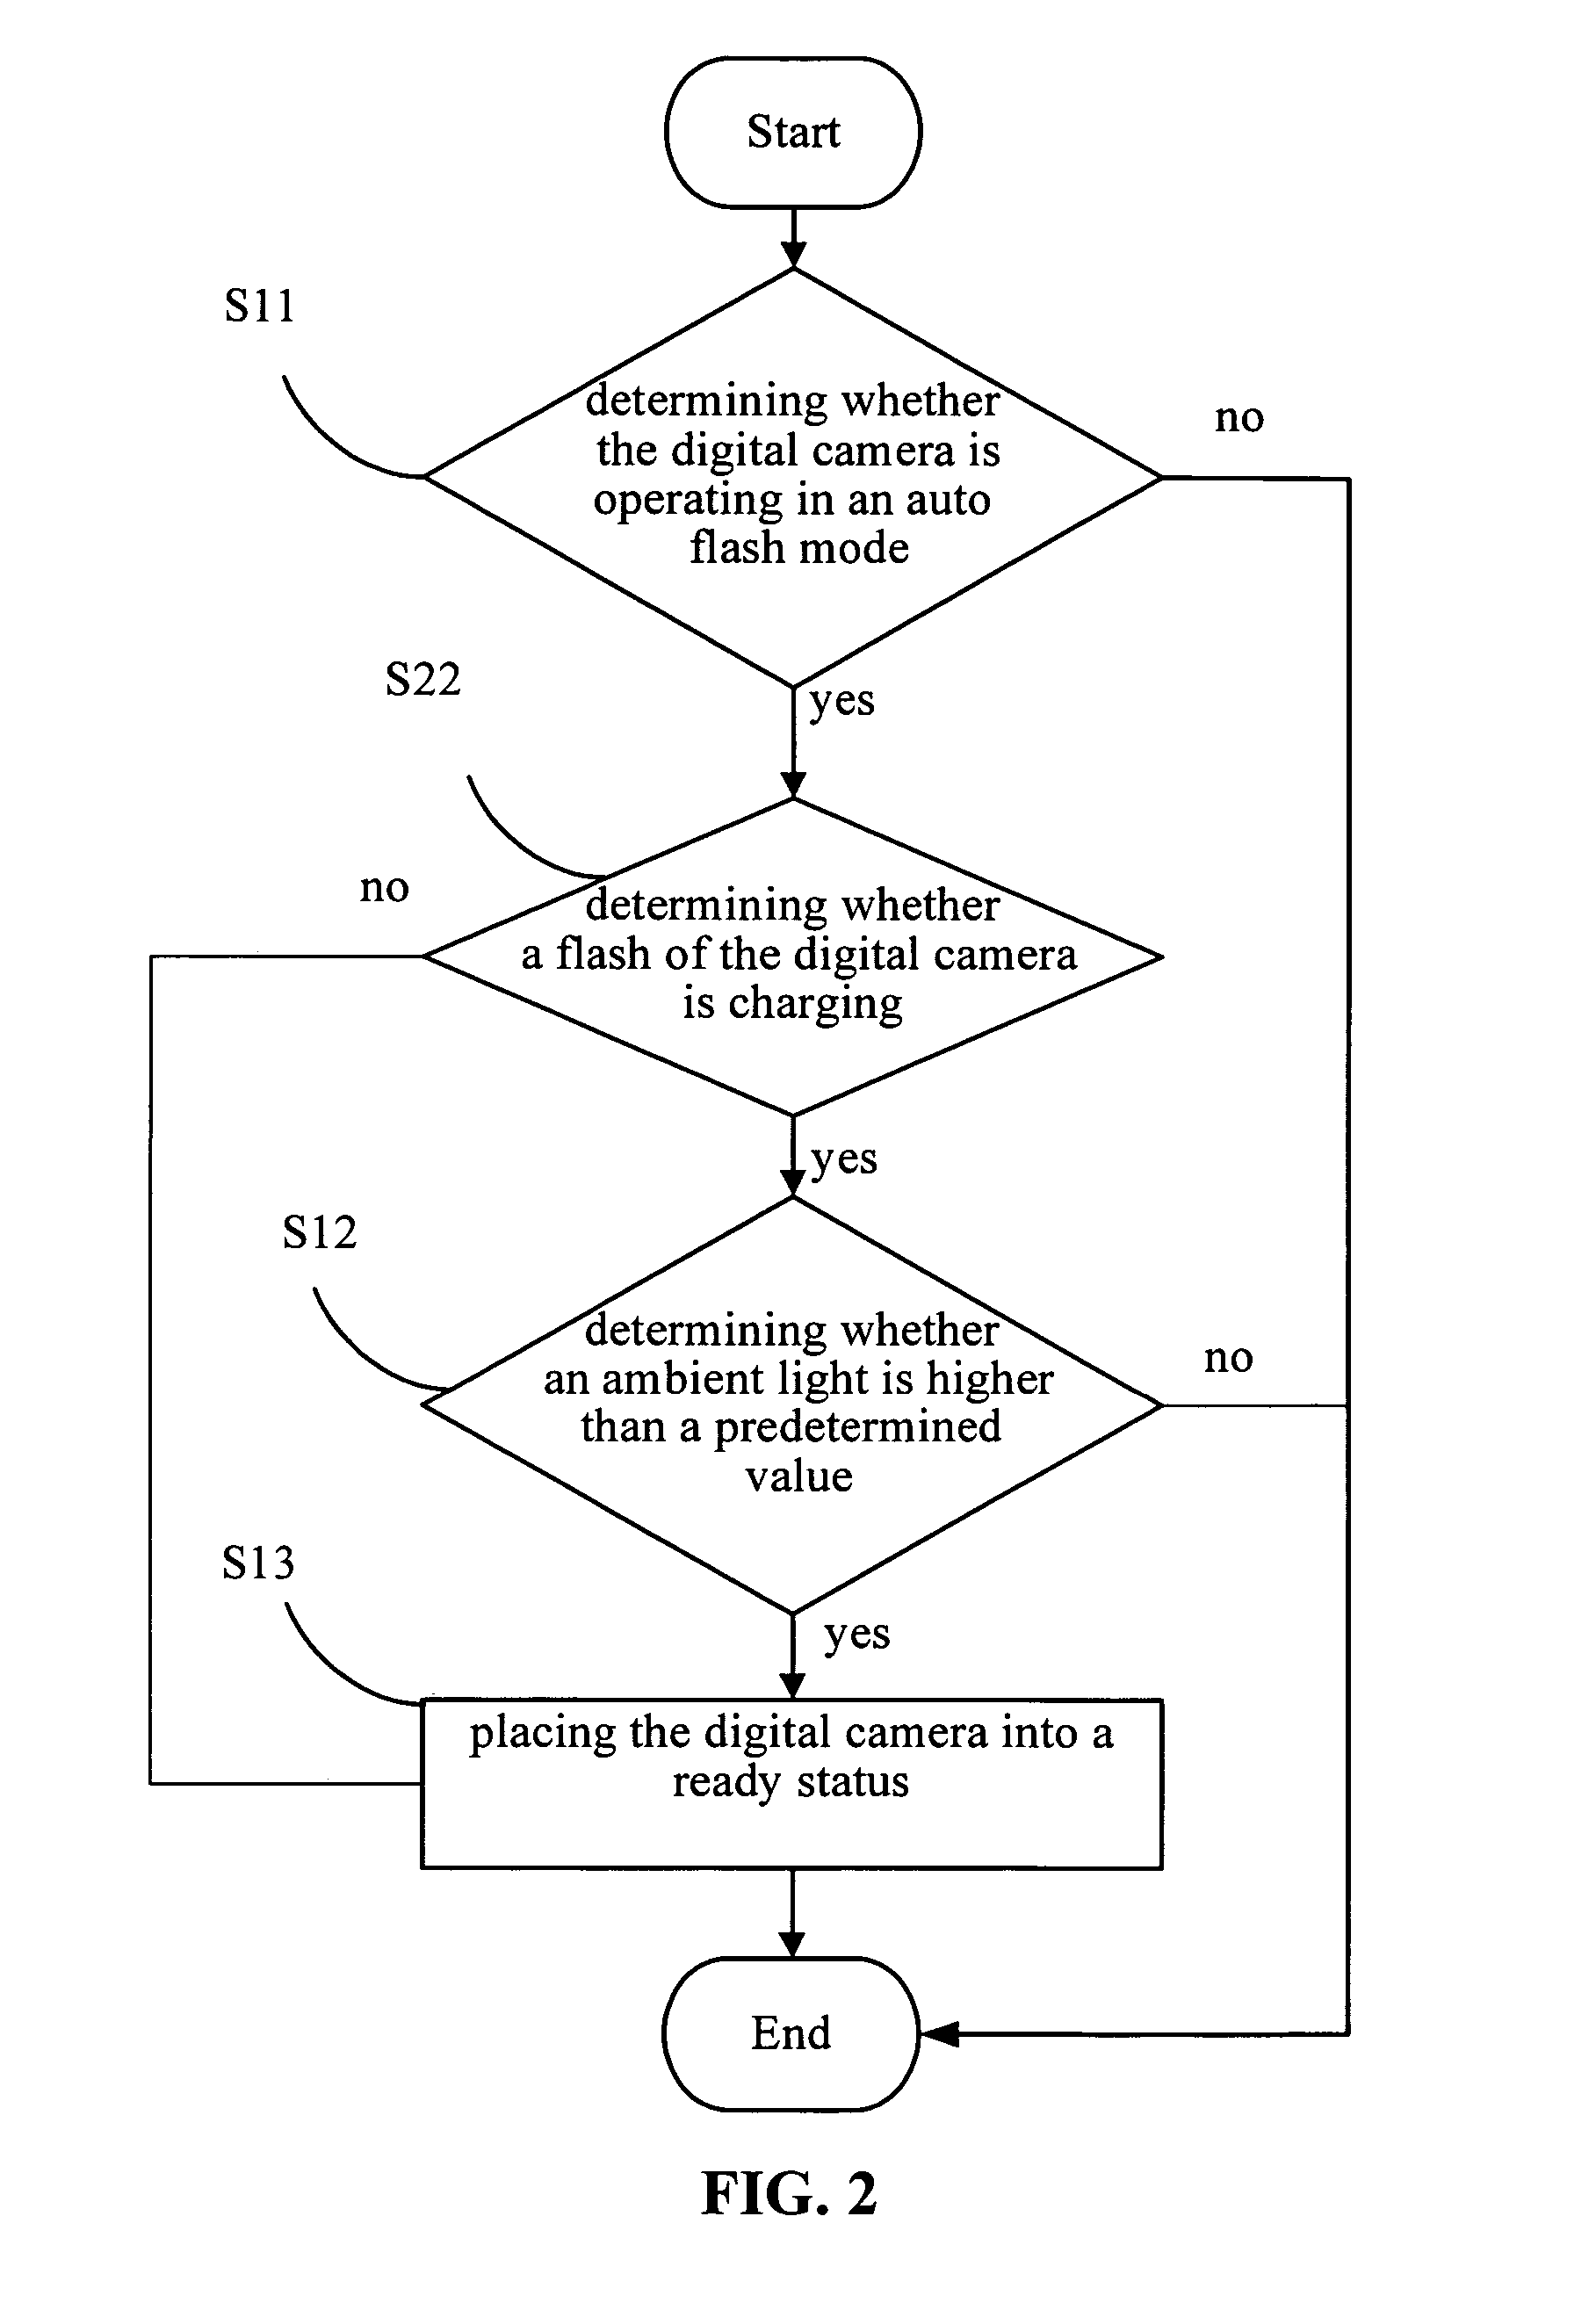 Method for controlling the picture capturing process of a digital camera